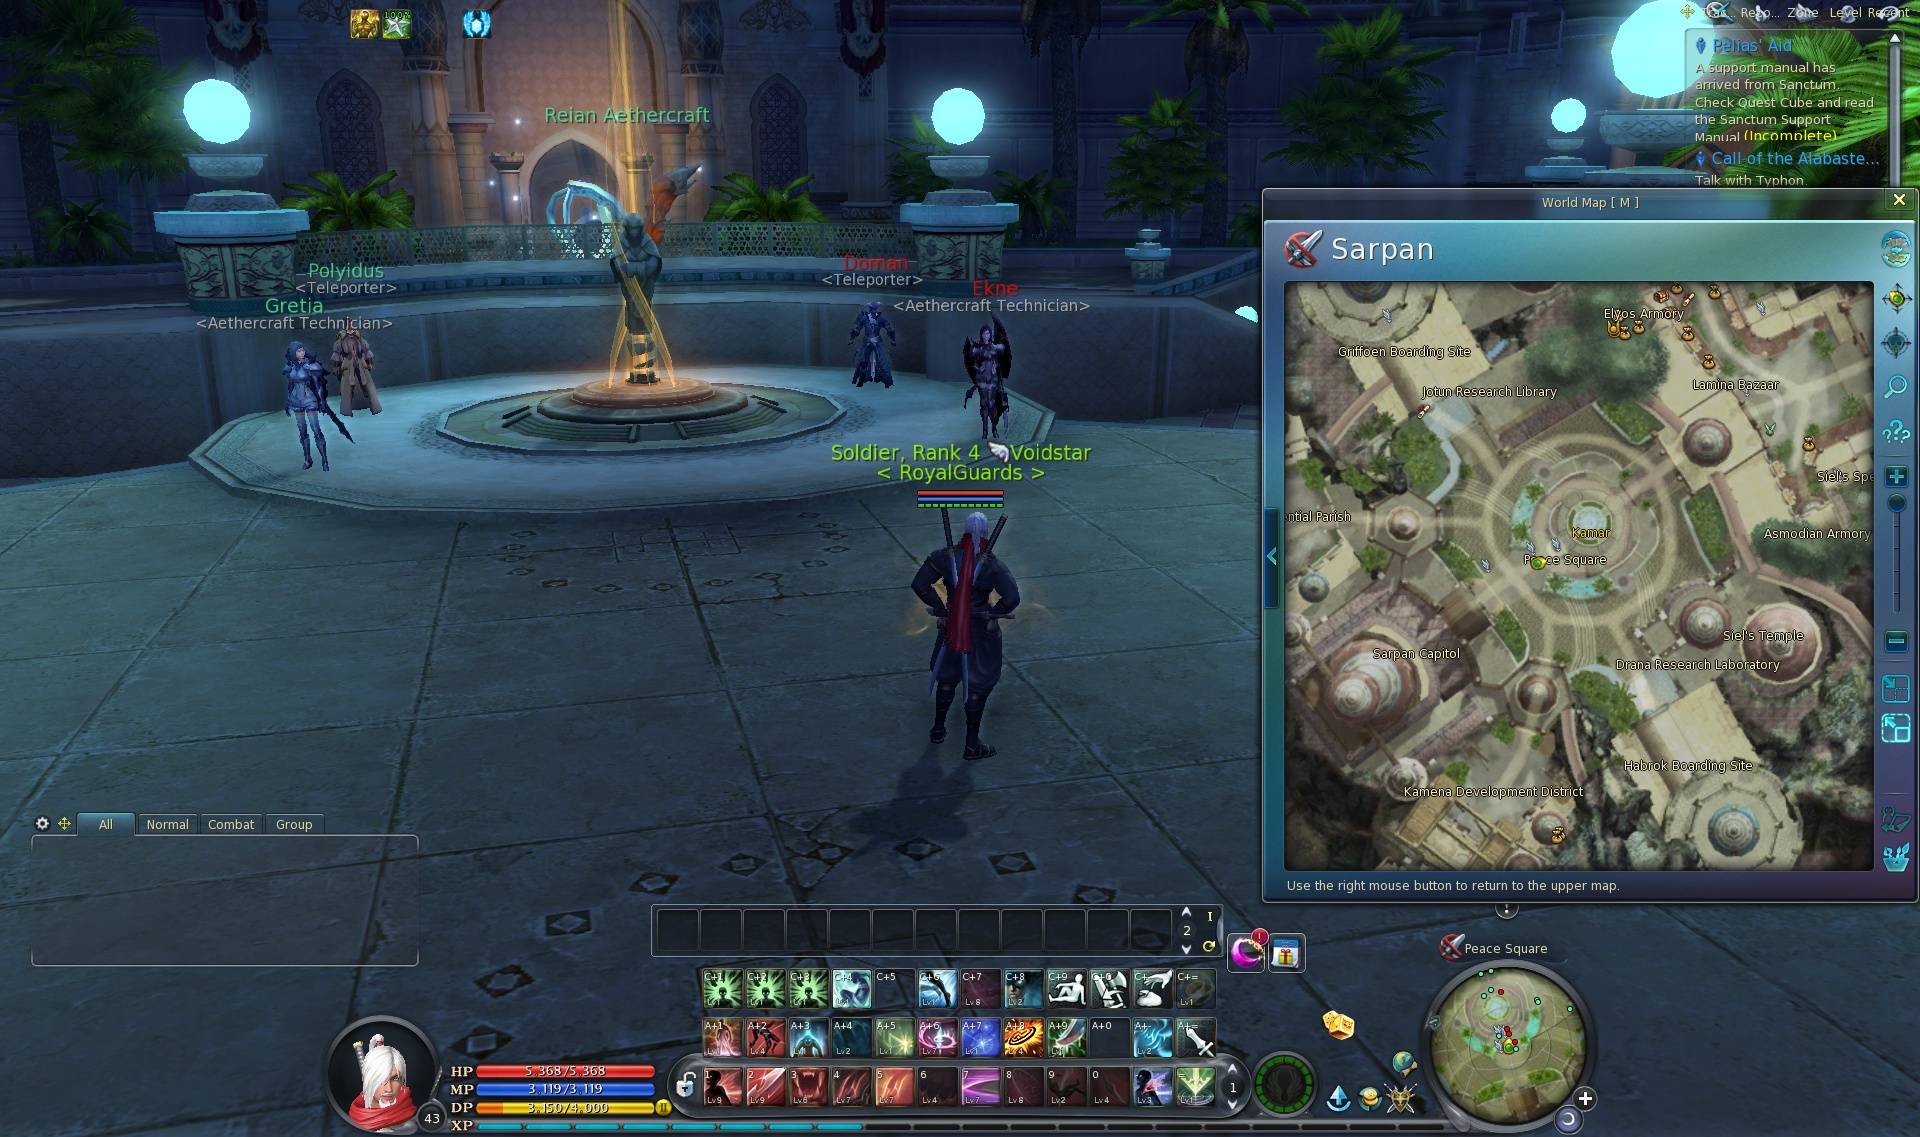 Aion0016 - What's your favorite version of Aion to play, and why? - RaGEZONE Forums